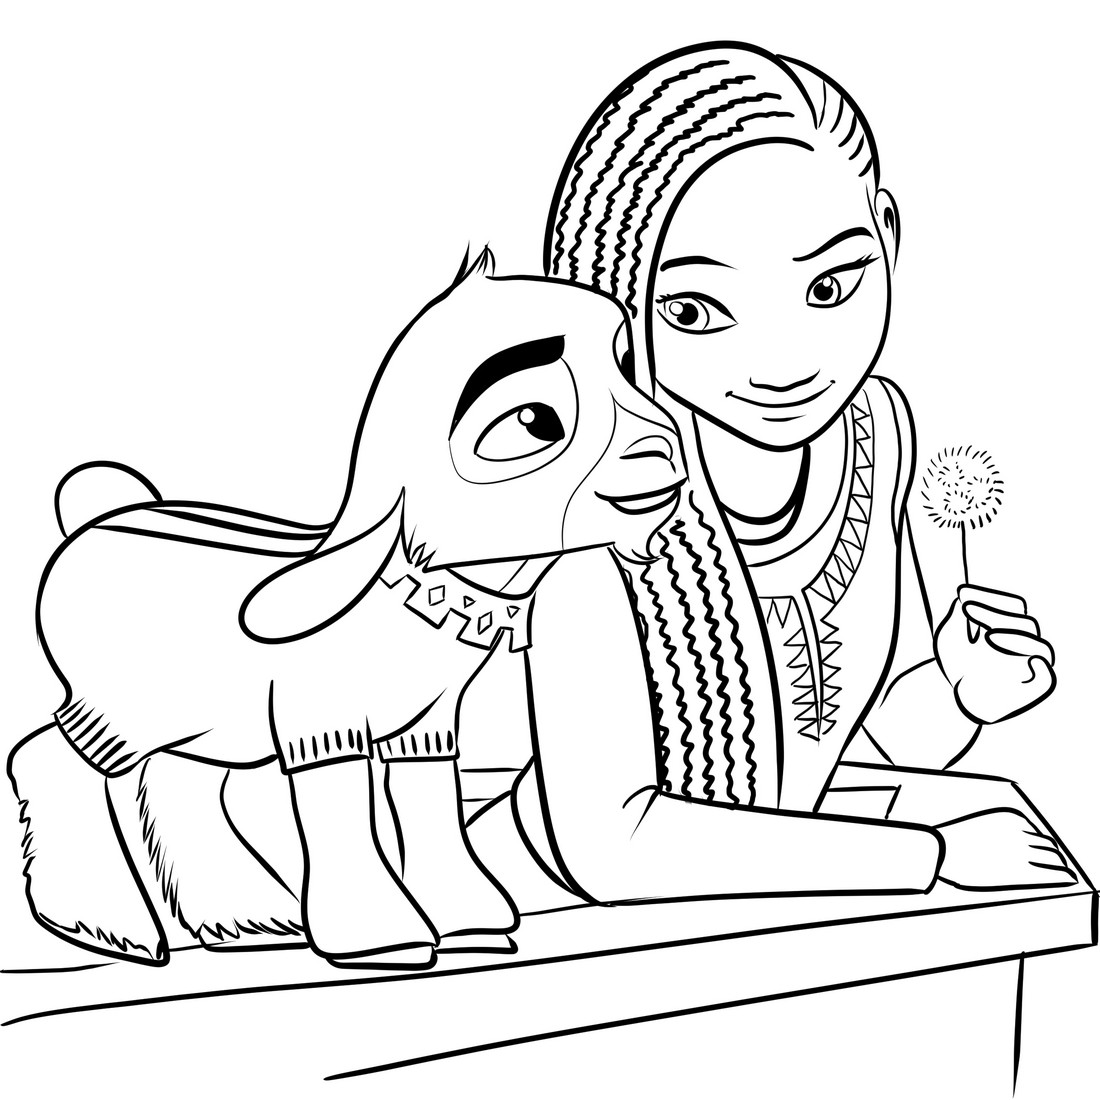 Asha, Valentino from Wish (Walt Disney Pictures) coloring page to print and coloring